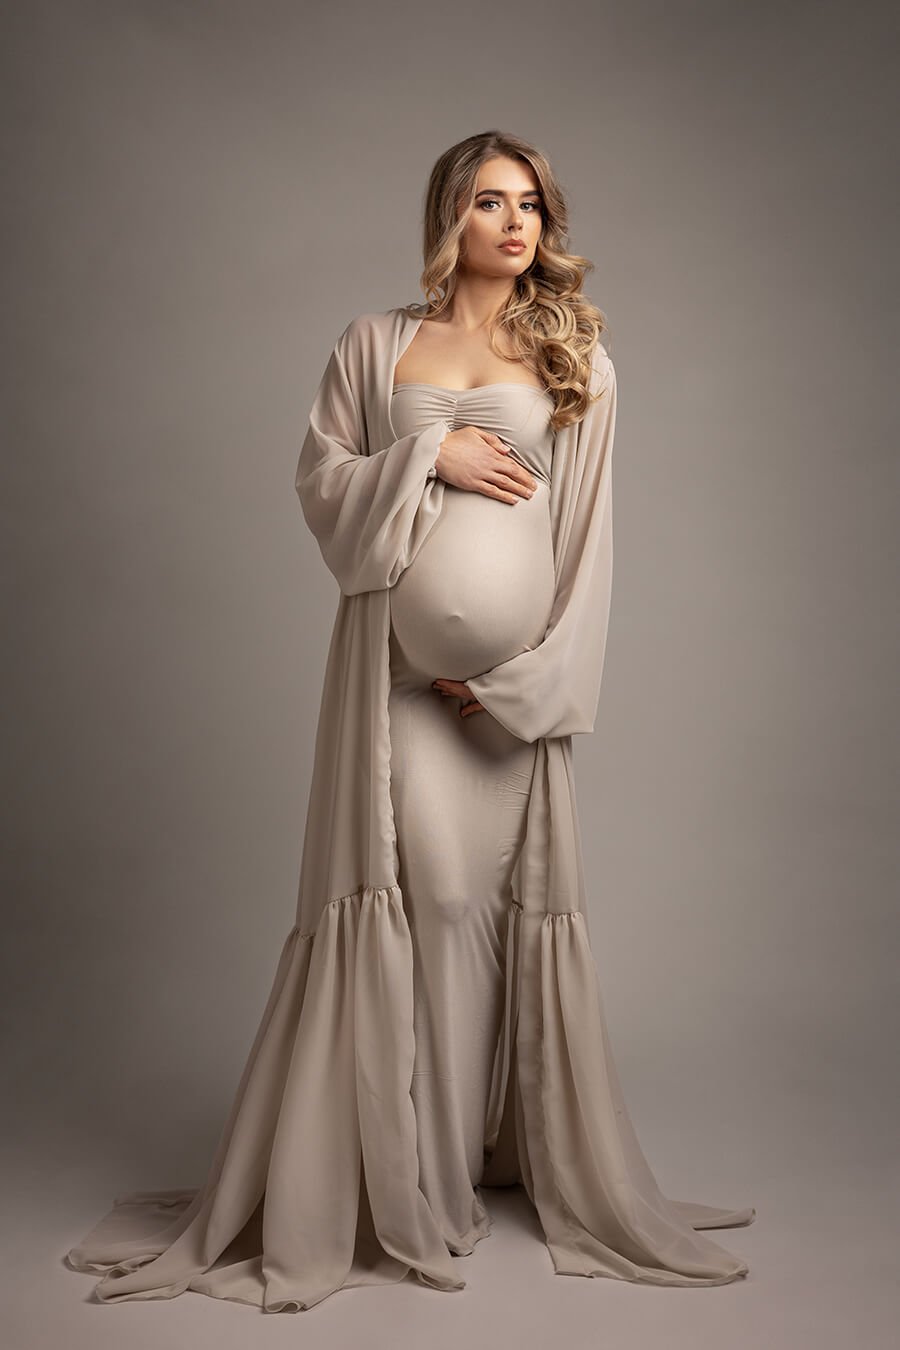 pregnant blond model poses in a studio holding her baby bump and looking to the camera. she is wearing a long chiffon robe in sand color and a matching long tight dress underneath.